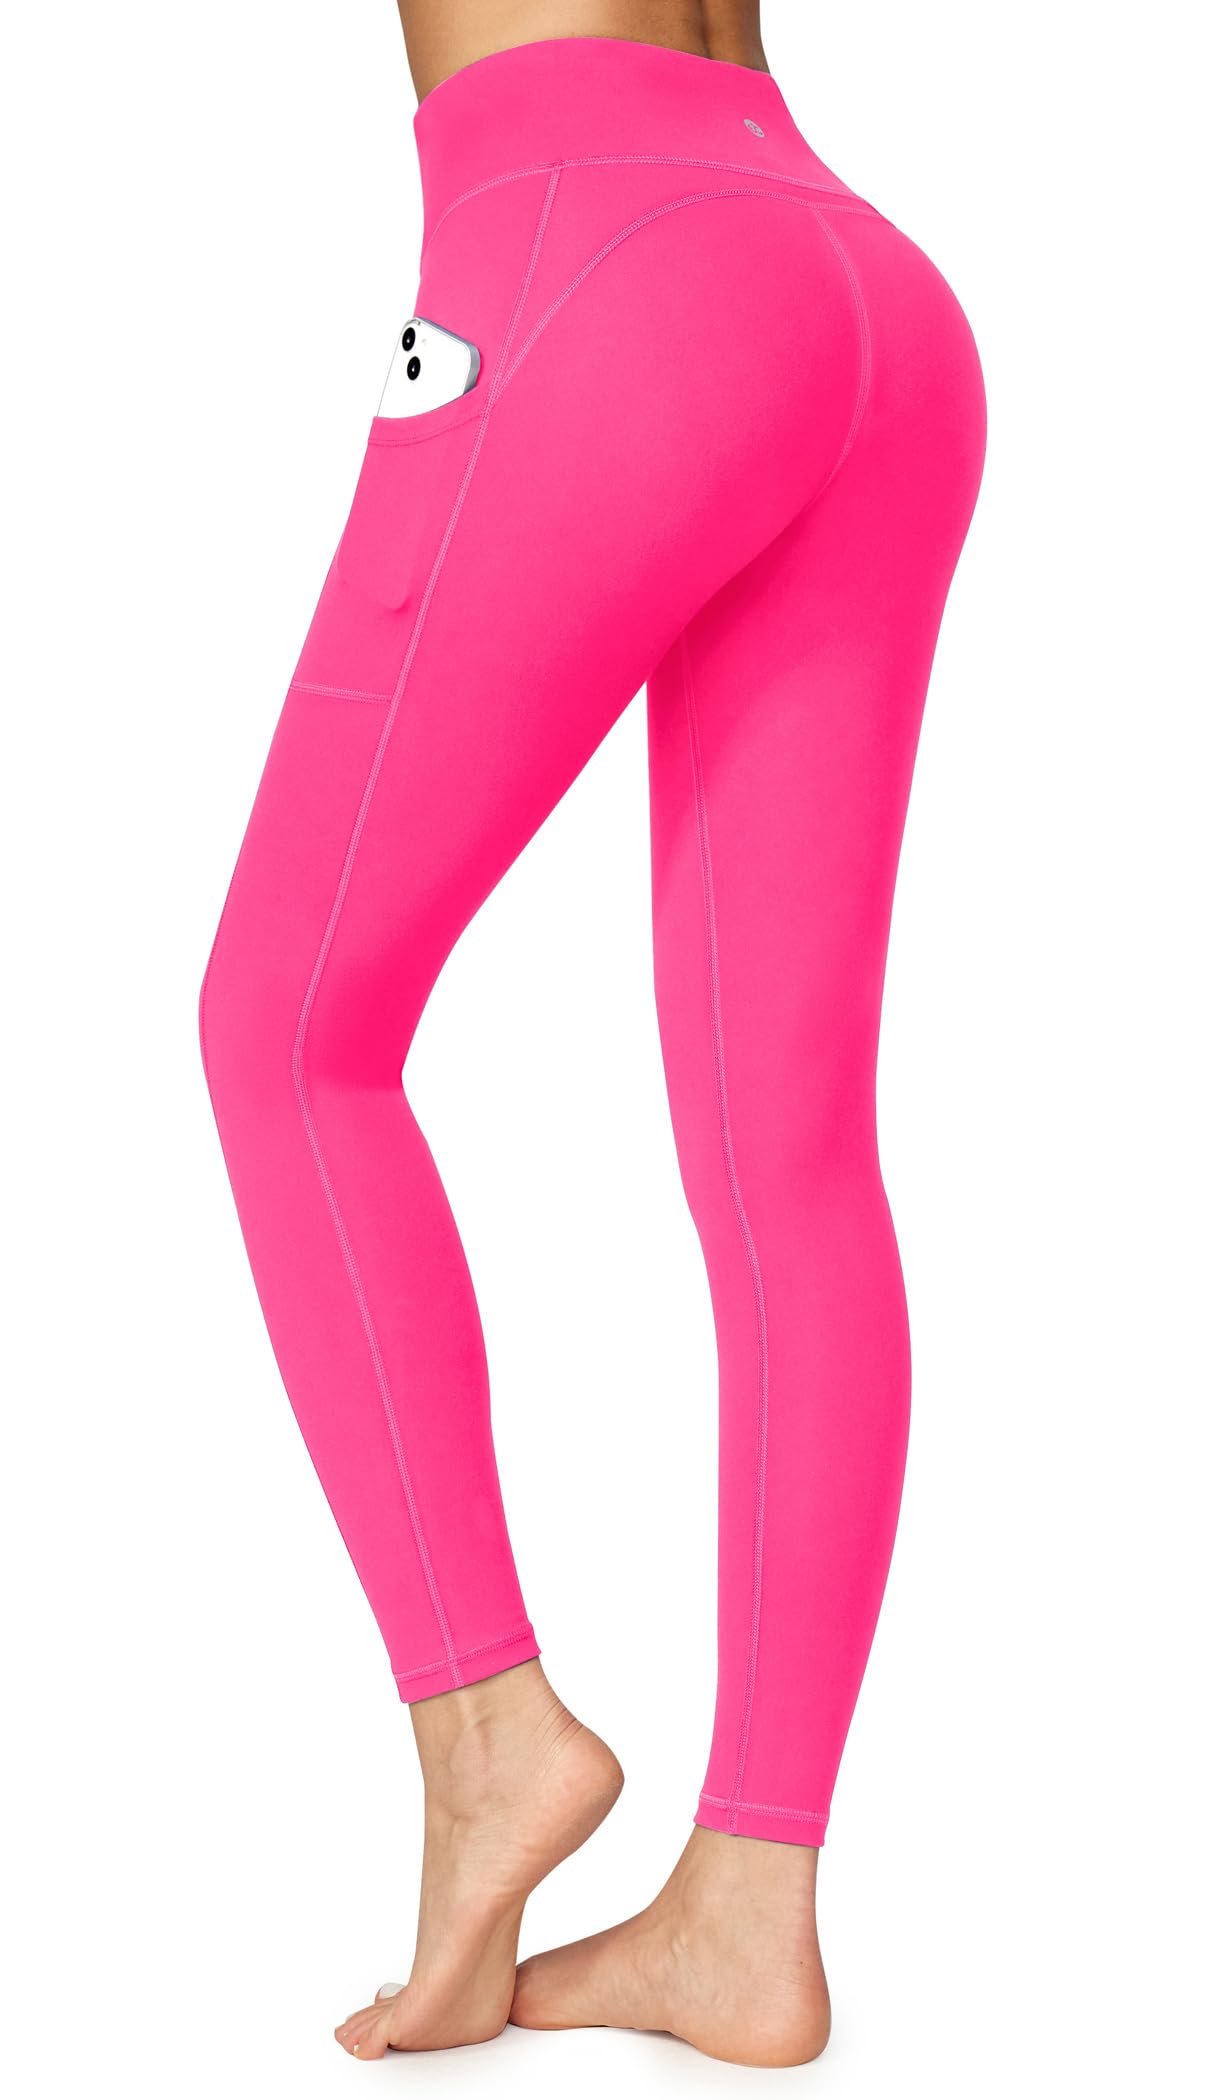 Women's High Waist, Tummy Control, Non See-Through Yoga Pants with Pockets